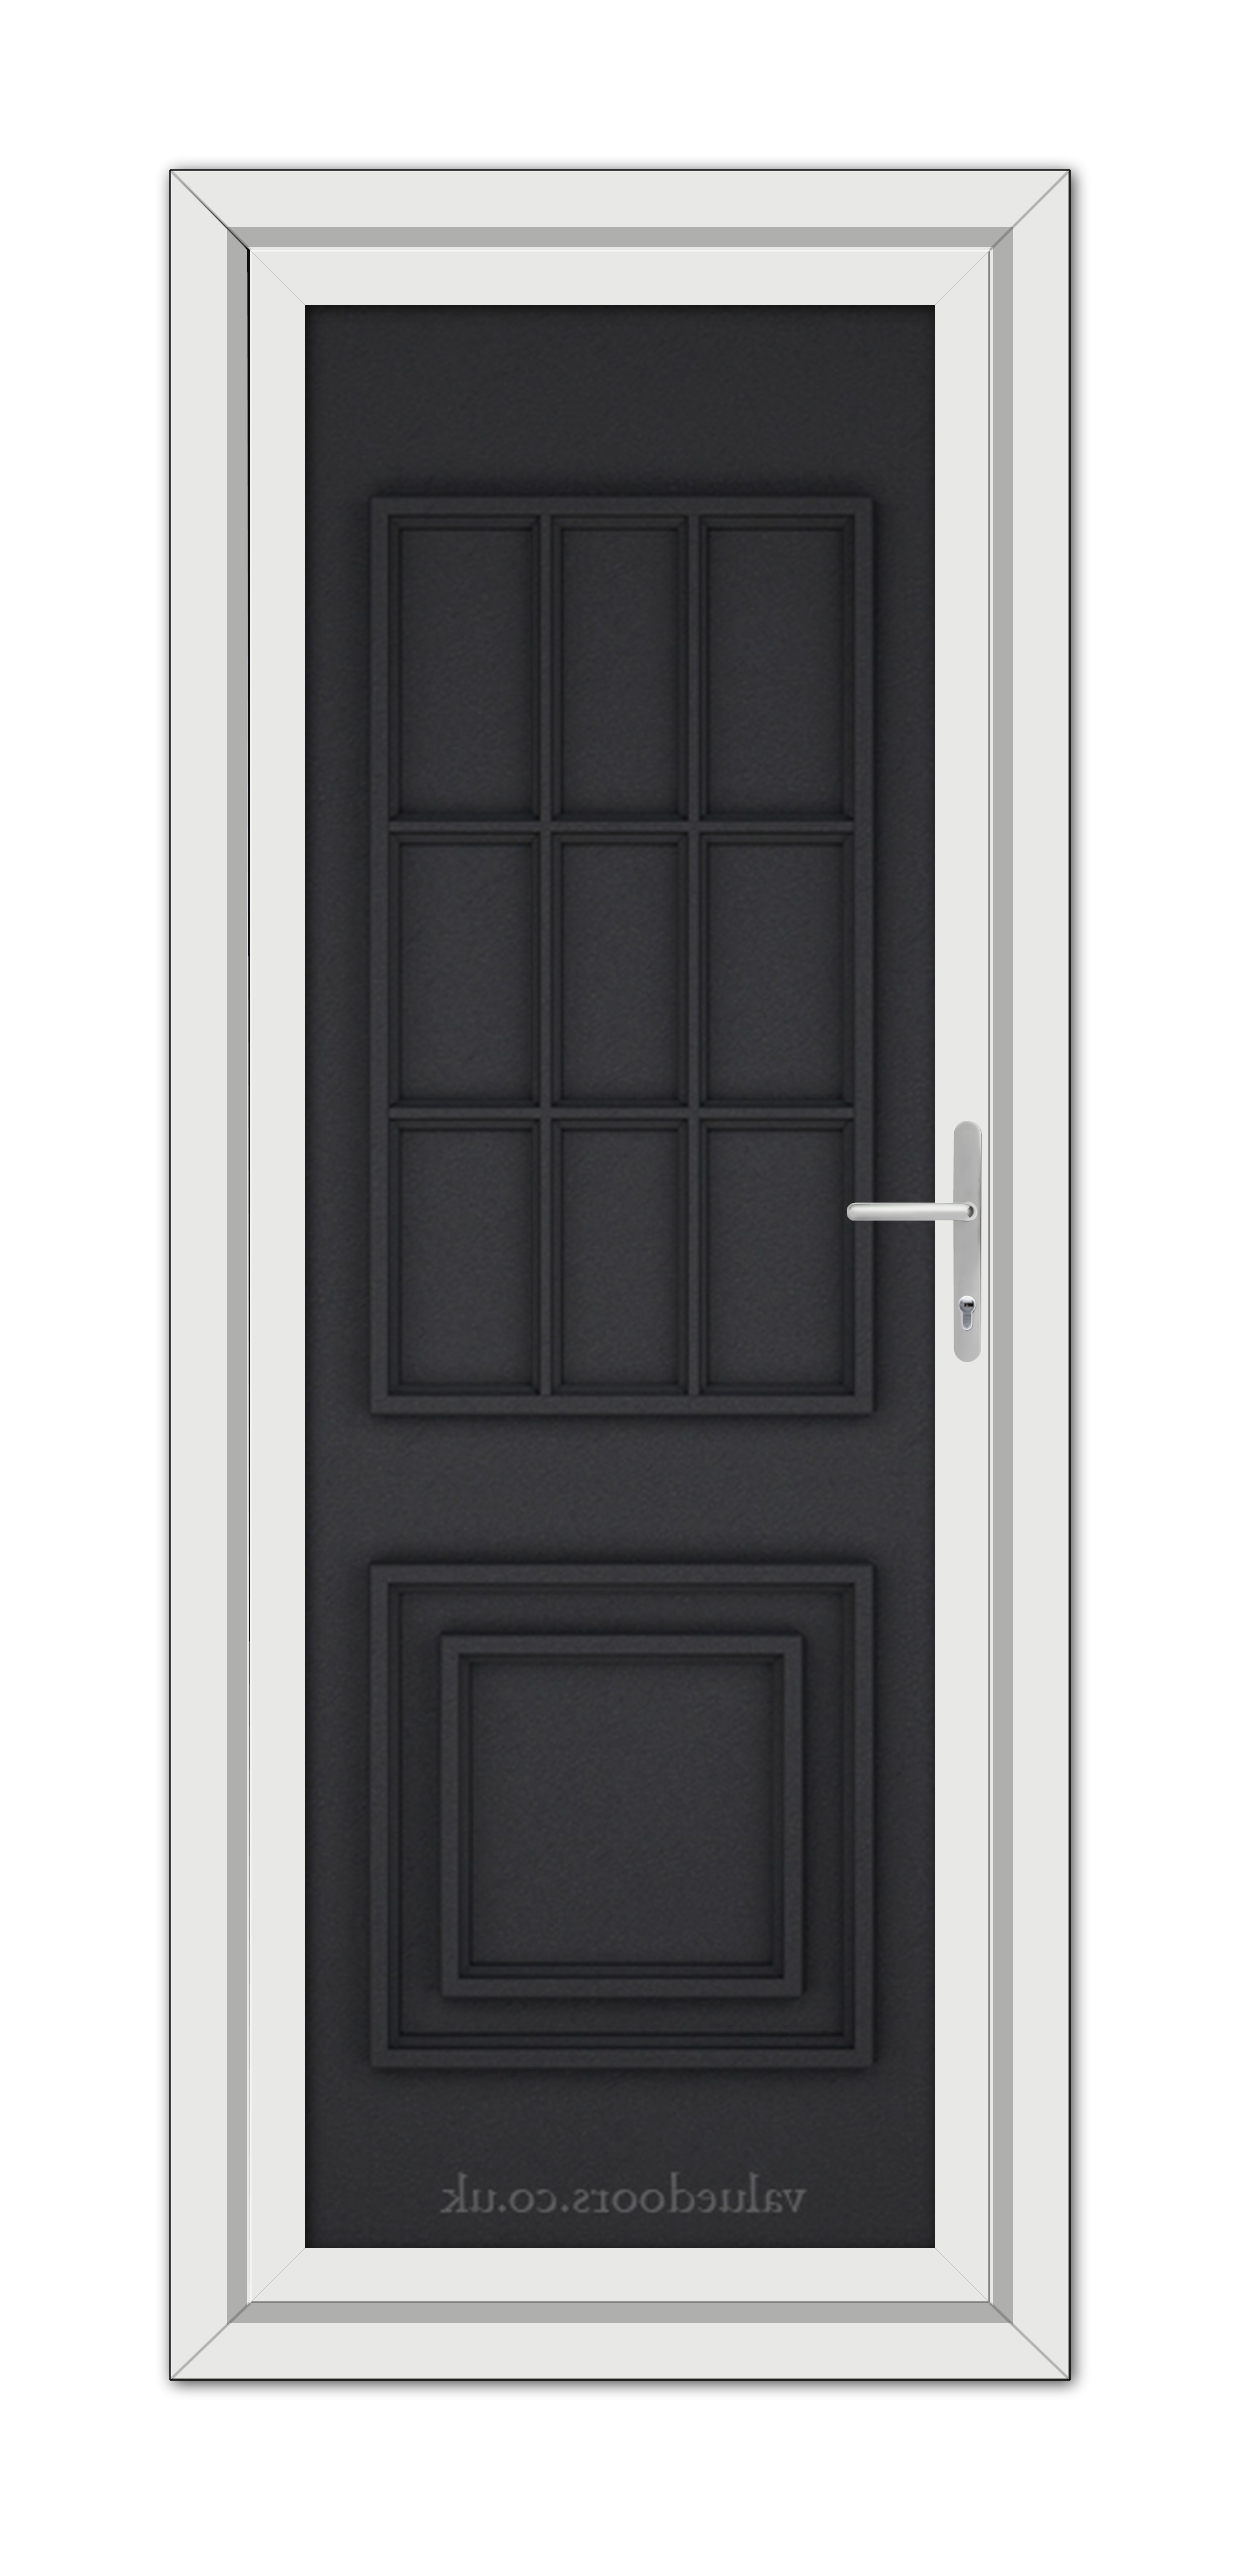 A modern, Black Brown Cambridge One Solid uPVC Door with a metallic handle, framed by a white door frame, viewed from the front.